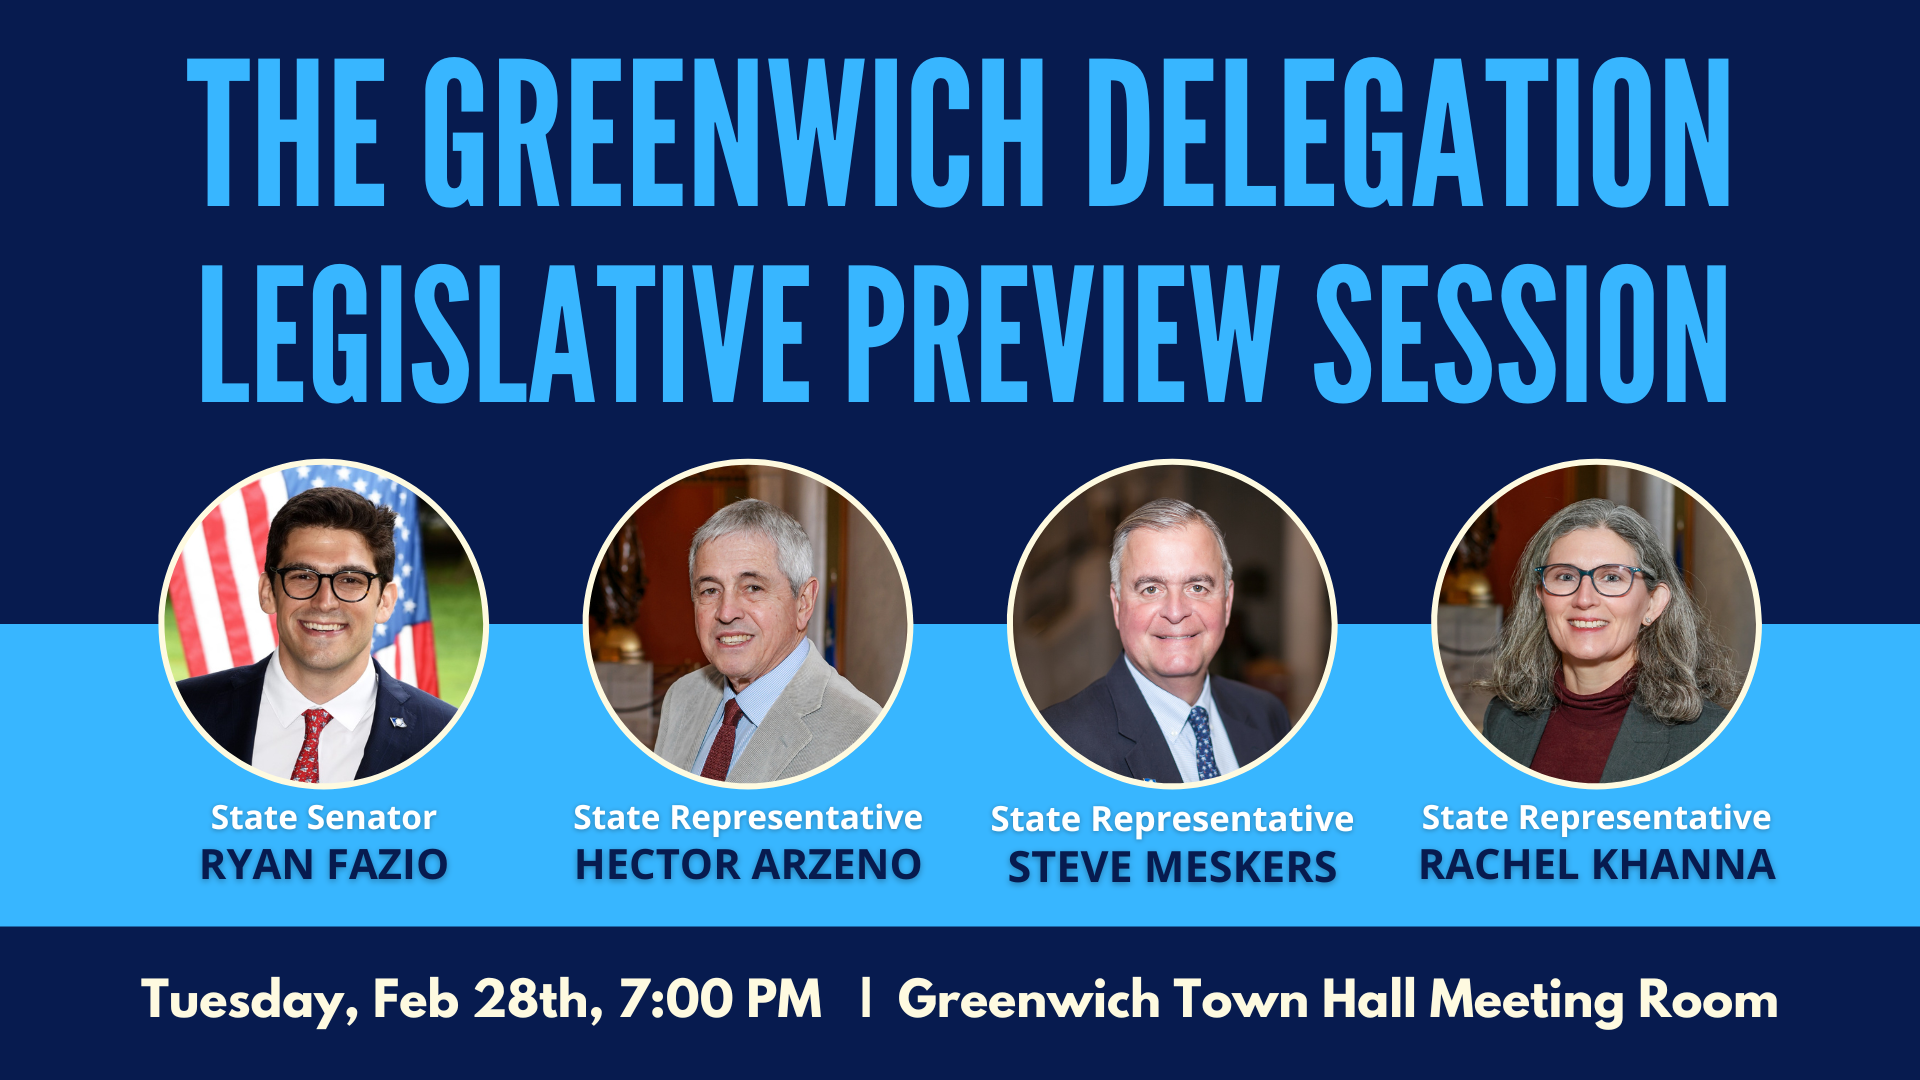 Please join the Greenwich delegation to discuss the current legislative session.